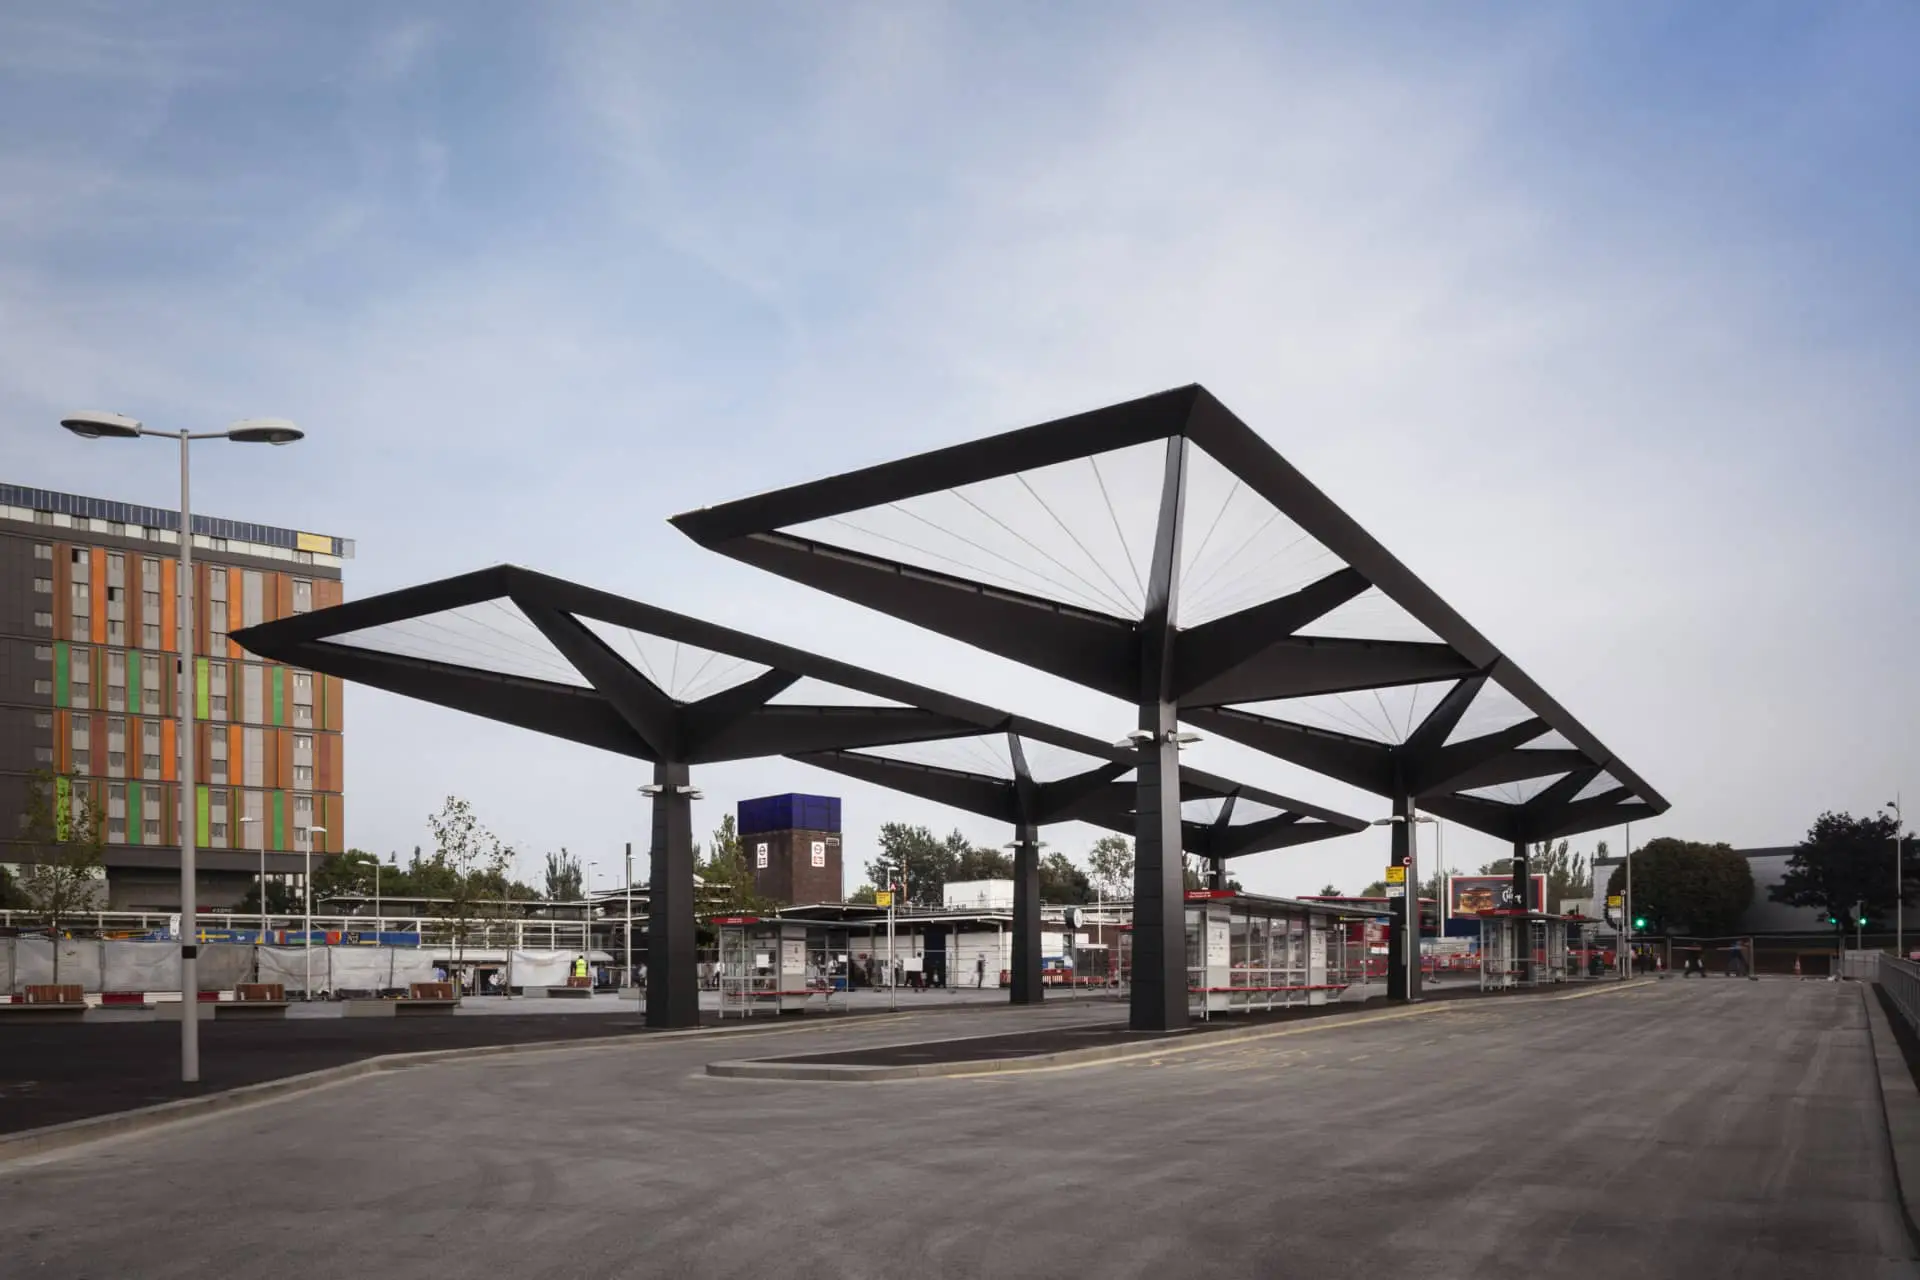 Tottenham Hale bus station features six stunning Texlon® ETFE canopies that seamlessly combines aesthetics, design and functionality.